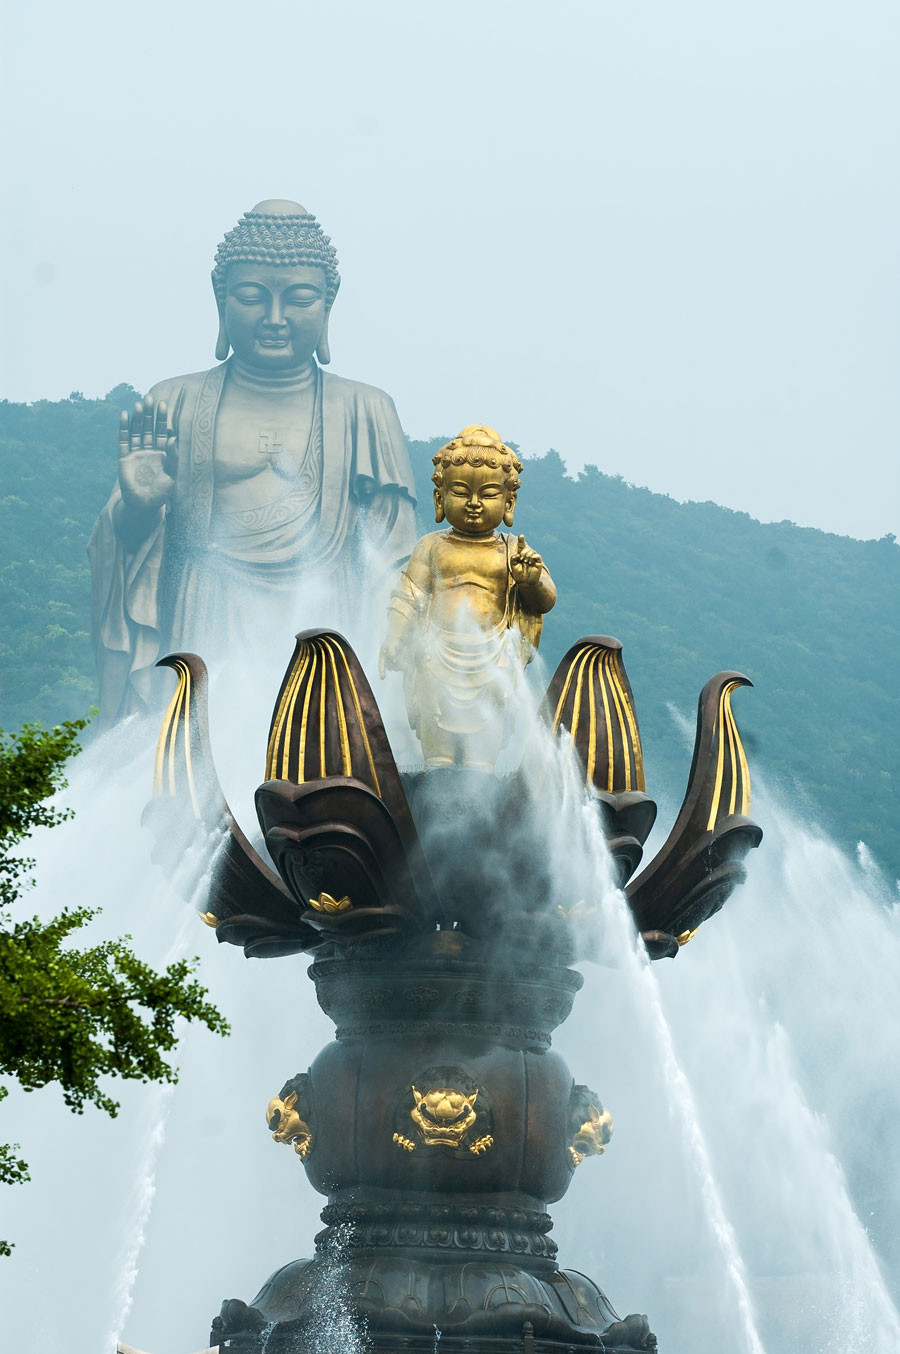 A glance at famous attractions in Wuxi